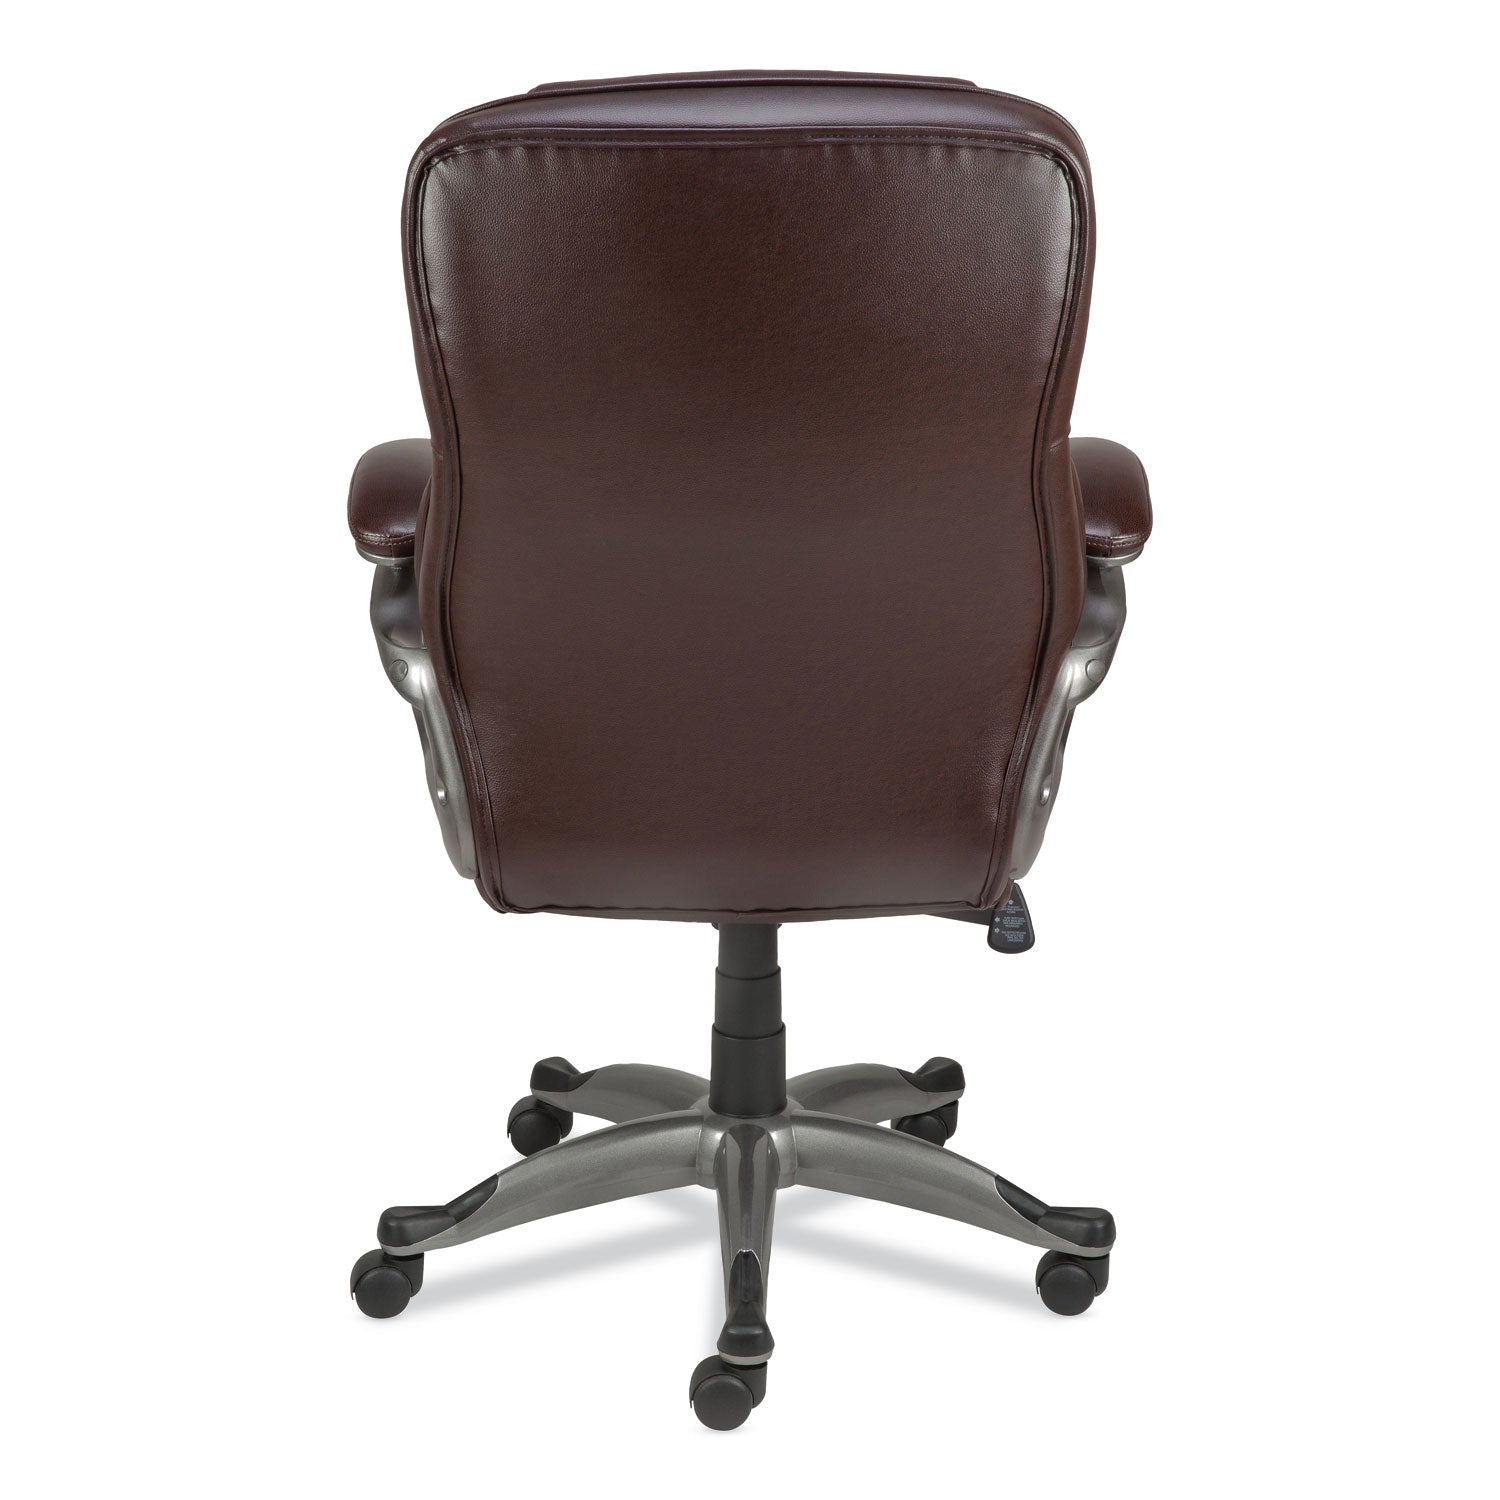 Alera Birns Series High-Back Task Chair, Supports Up to 250 lb, 18.11" to 22.05" Seat Height, Brown Seat/Back, Chrome Base - 5